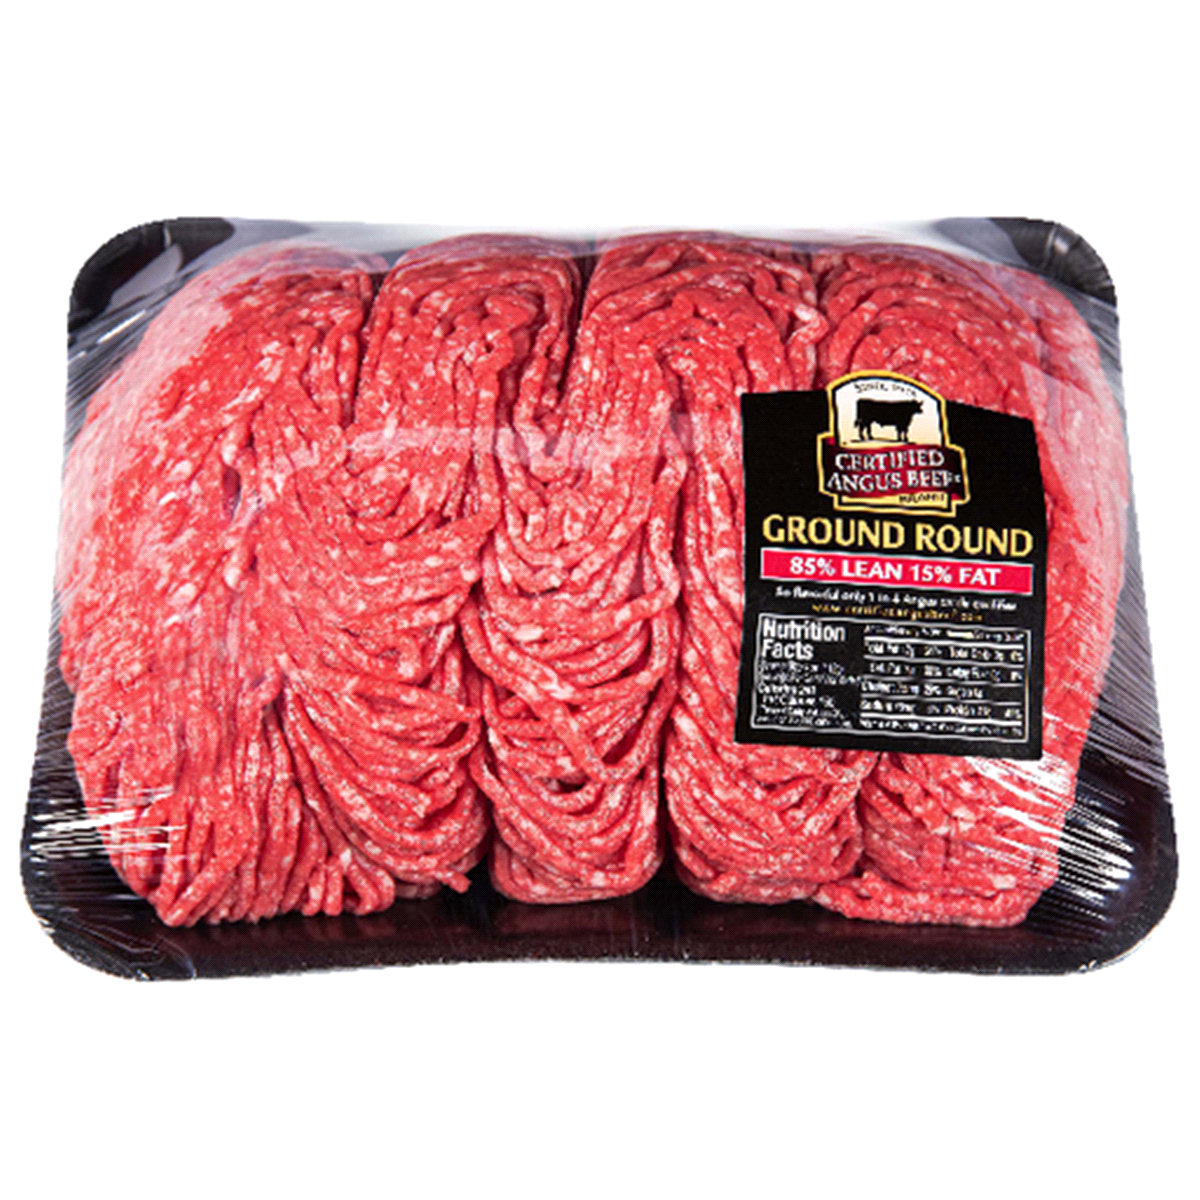 Fresh from Meijer Certified Angus Beef 85/15 Ground Round Family Pack ...